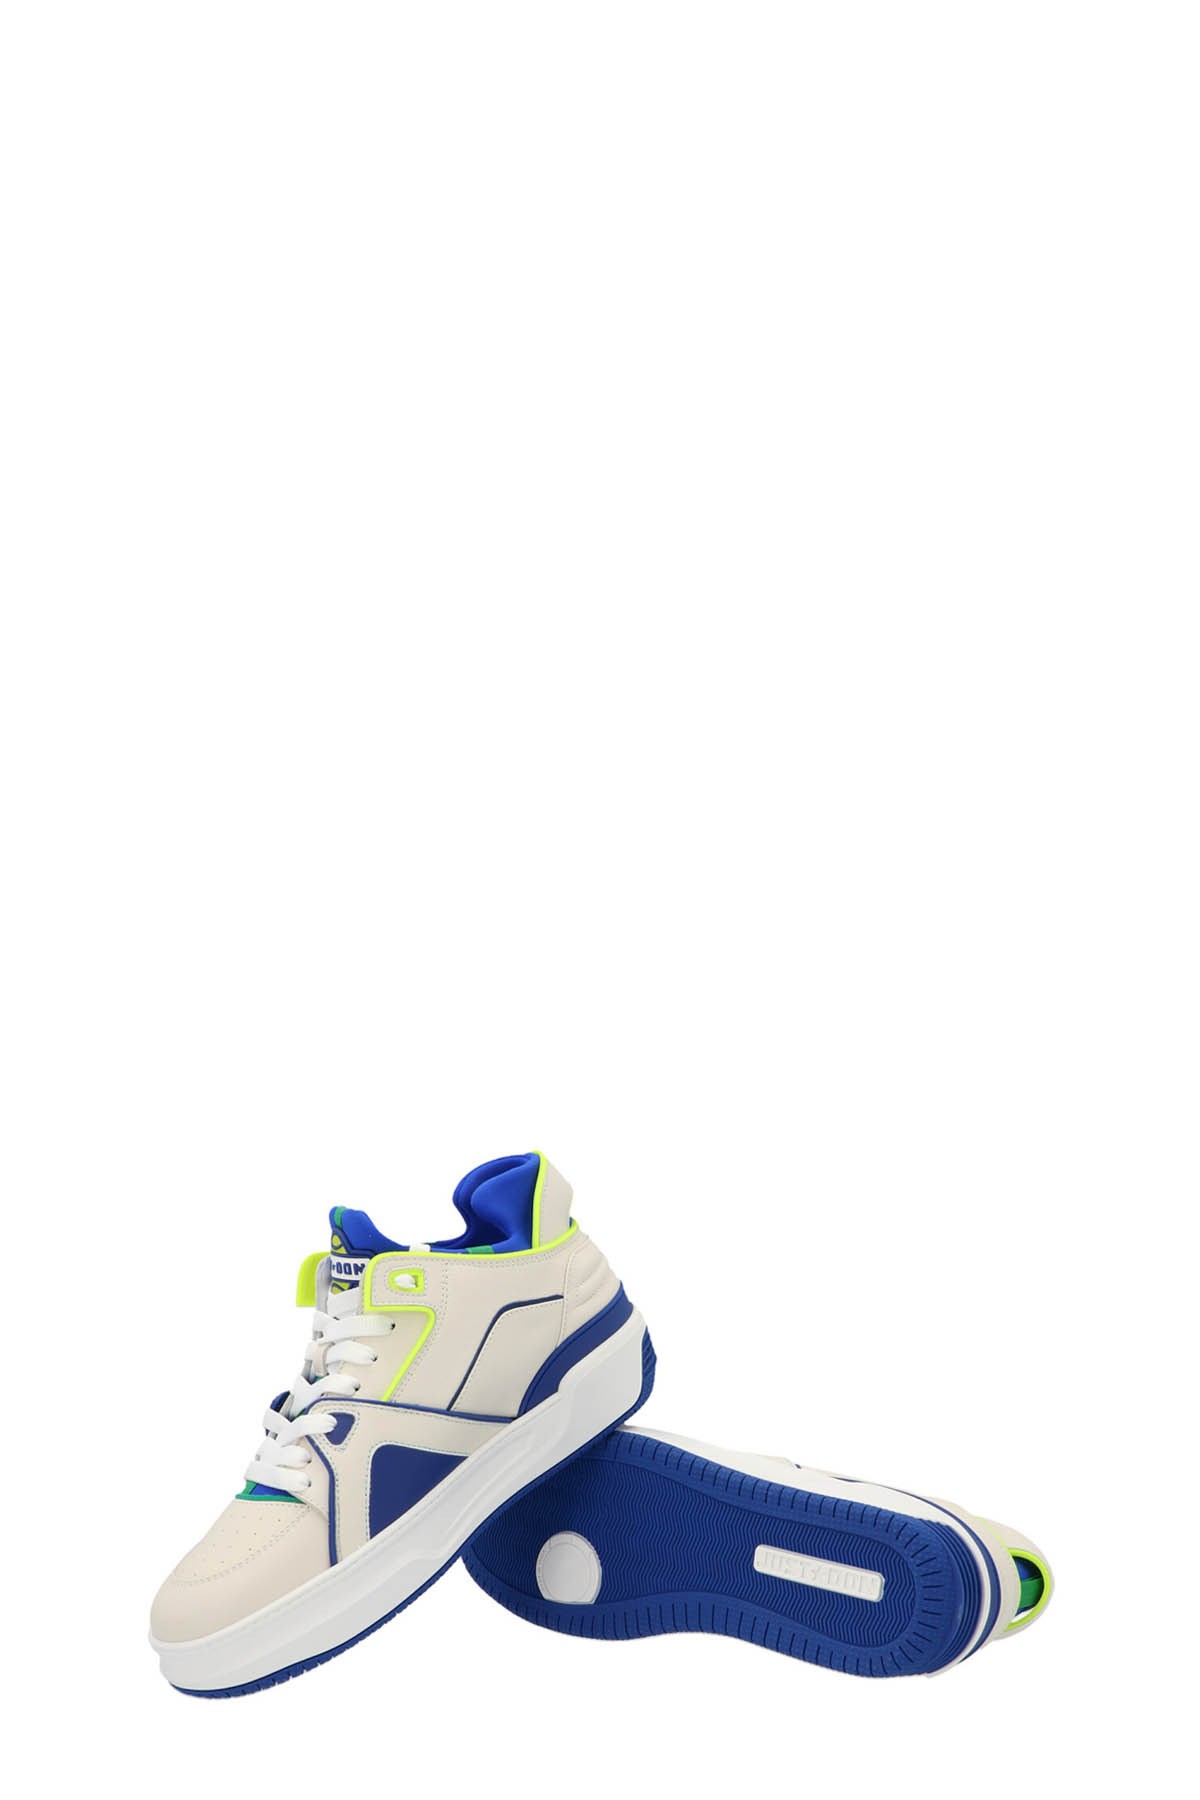 JUST DON 'Courtside Tennis Mid Jd2’ Sneakers